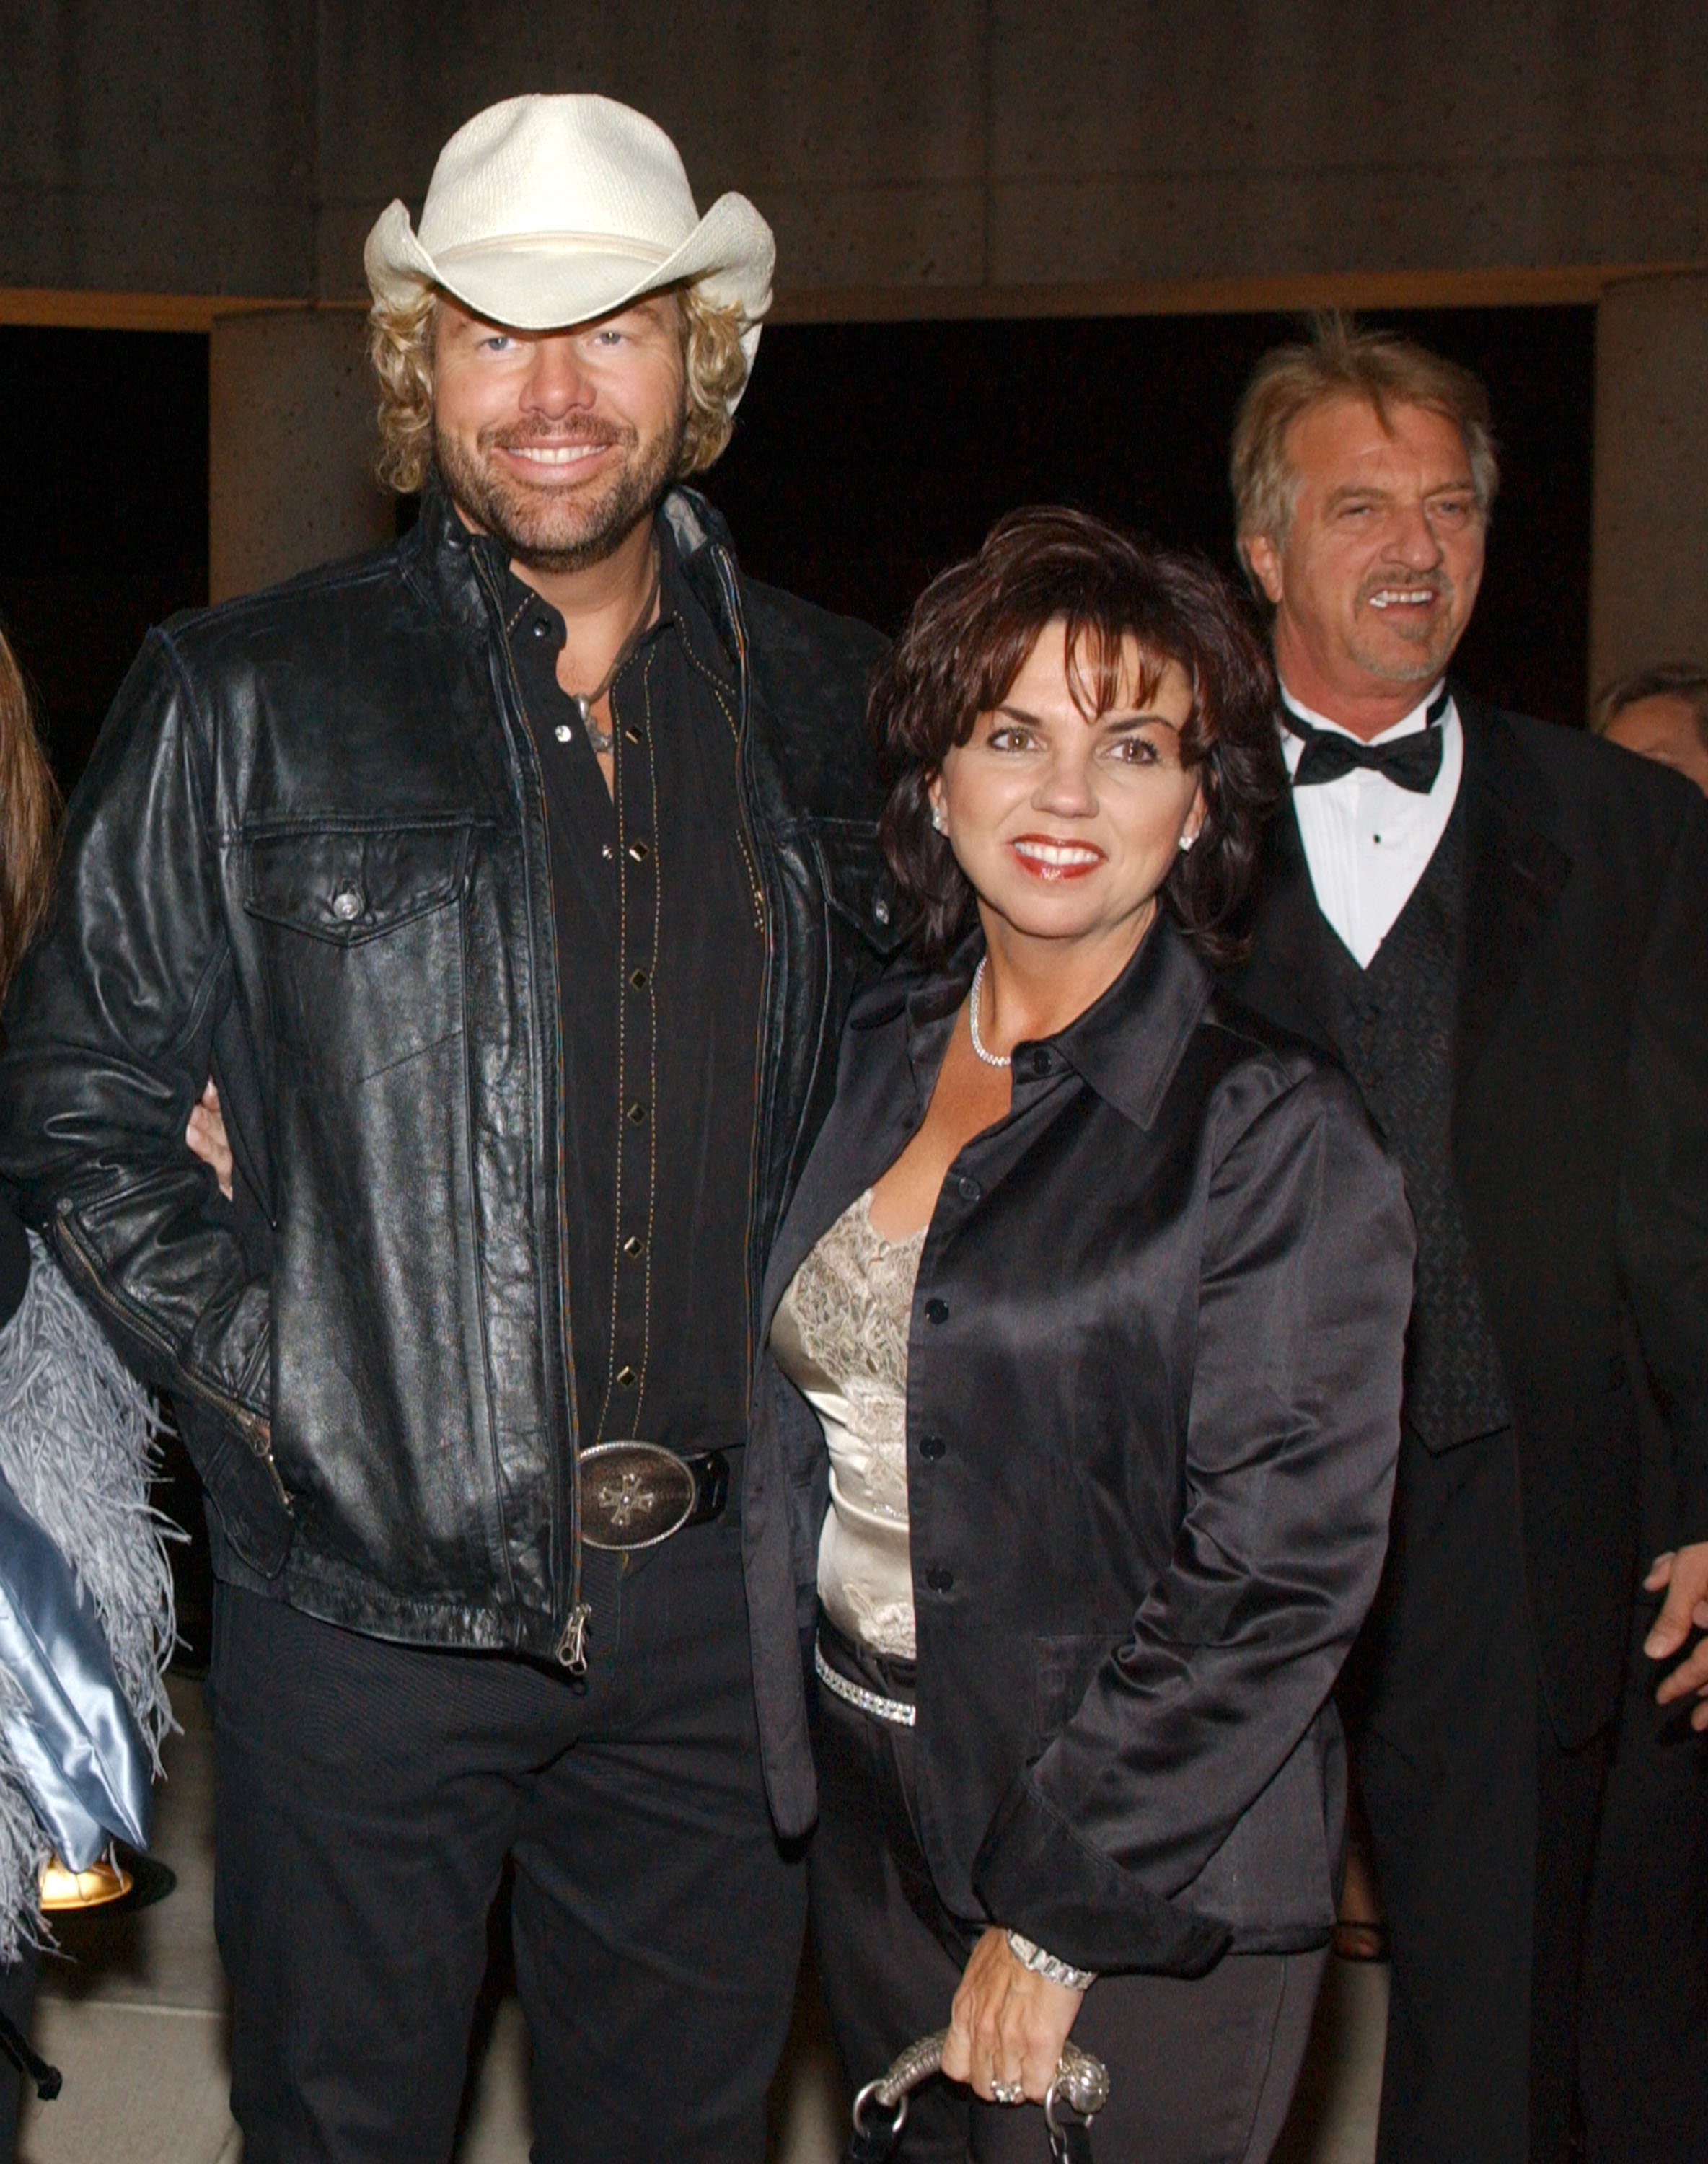 Toby Keith and wife Tricia Keith at the 52nd Annual BMI Country Awards on November 8, 2004. | Source: Getty Images